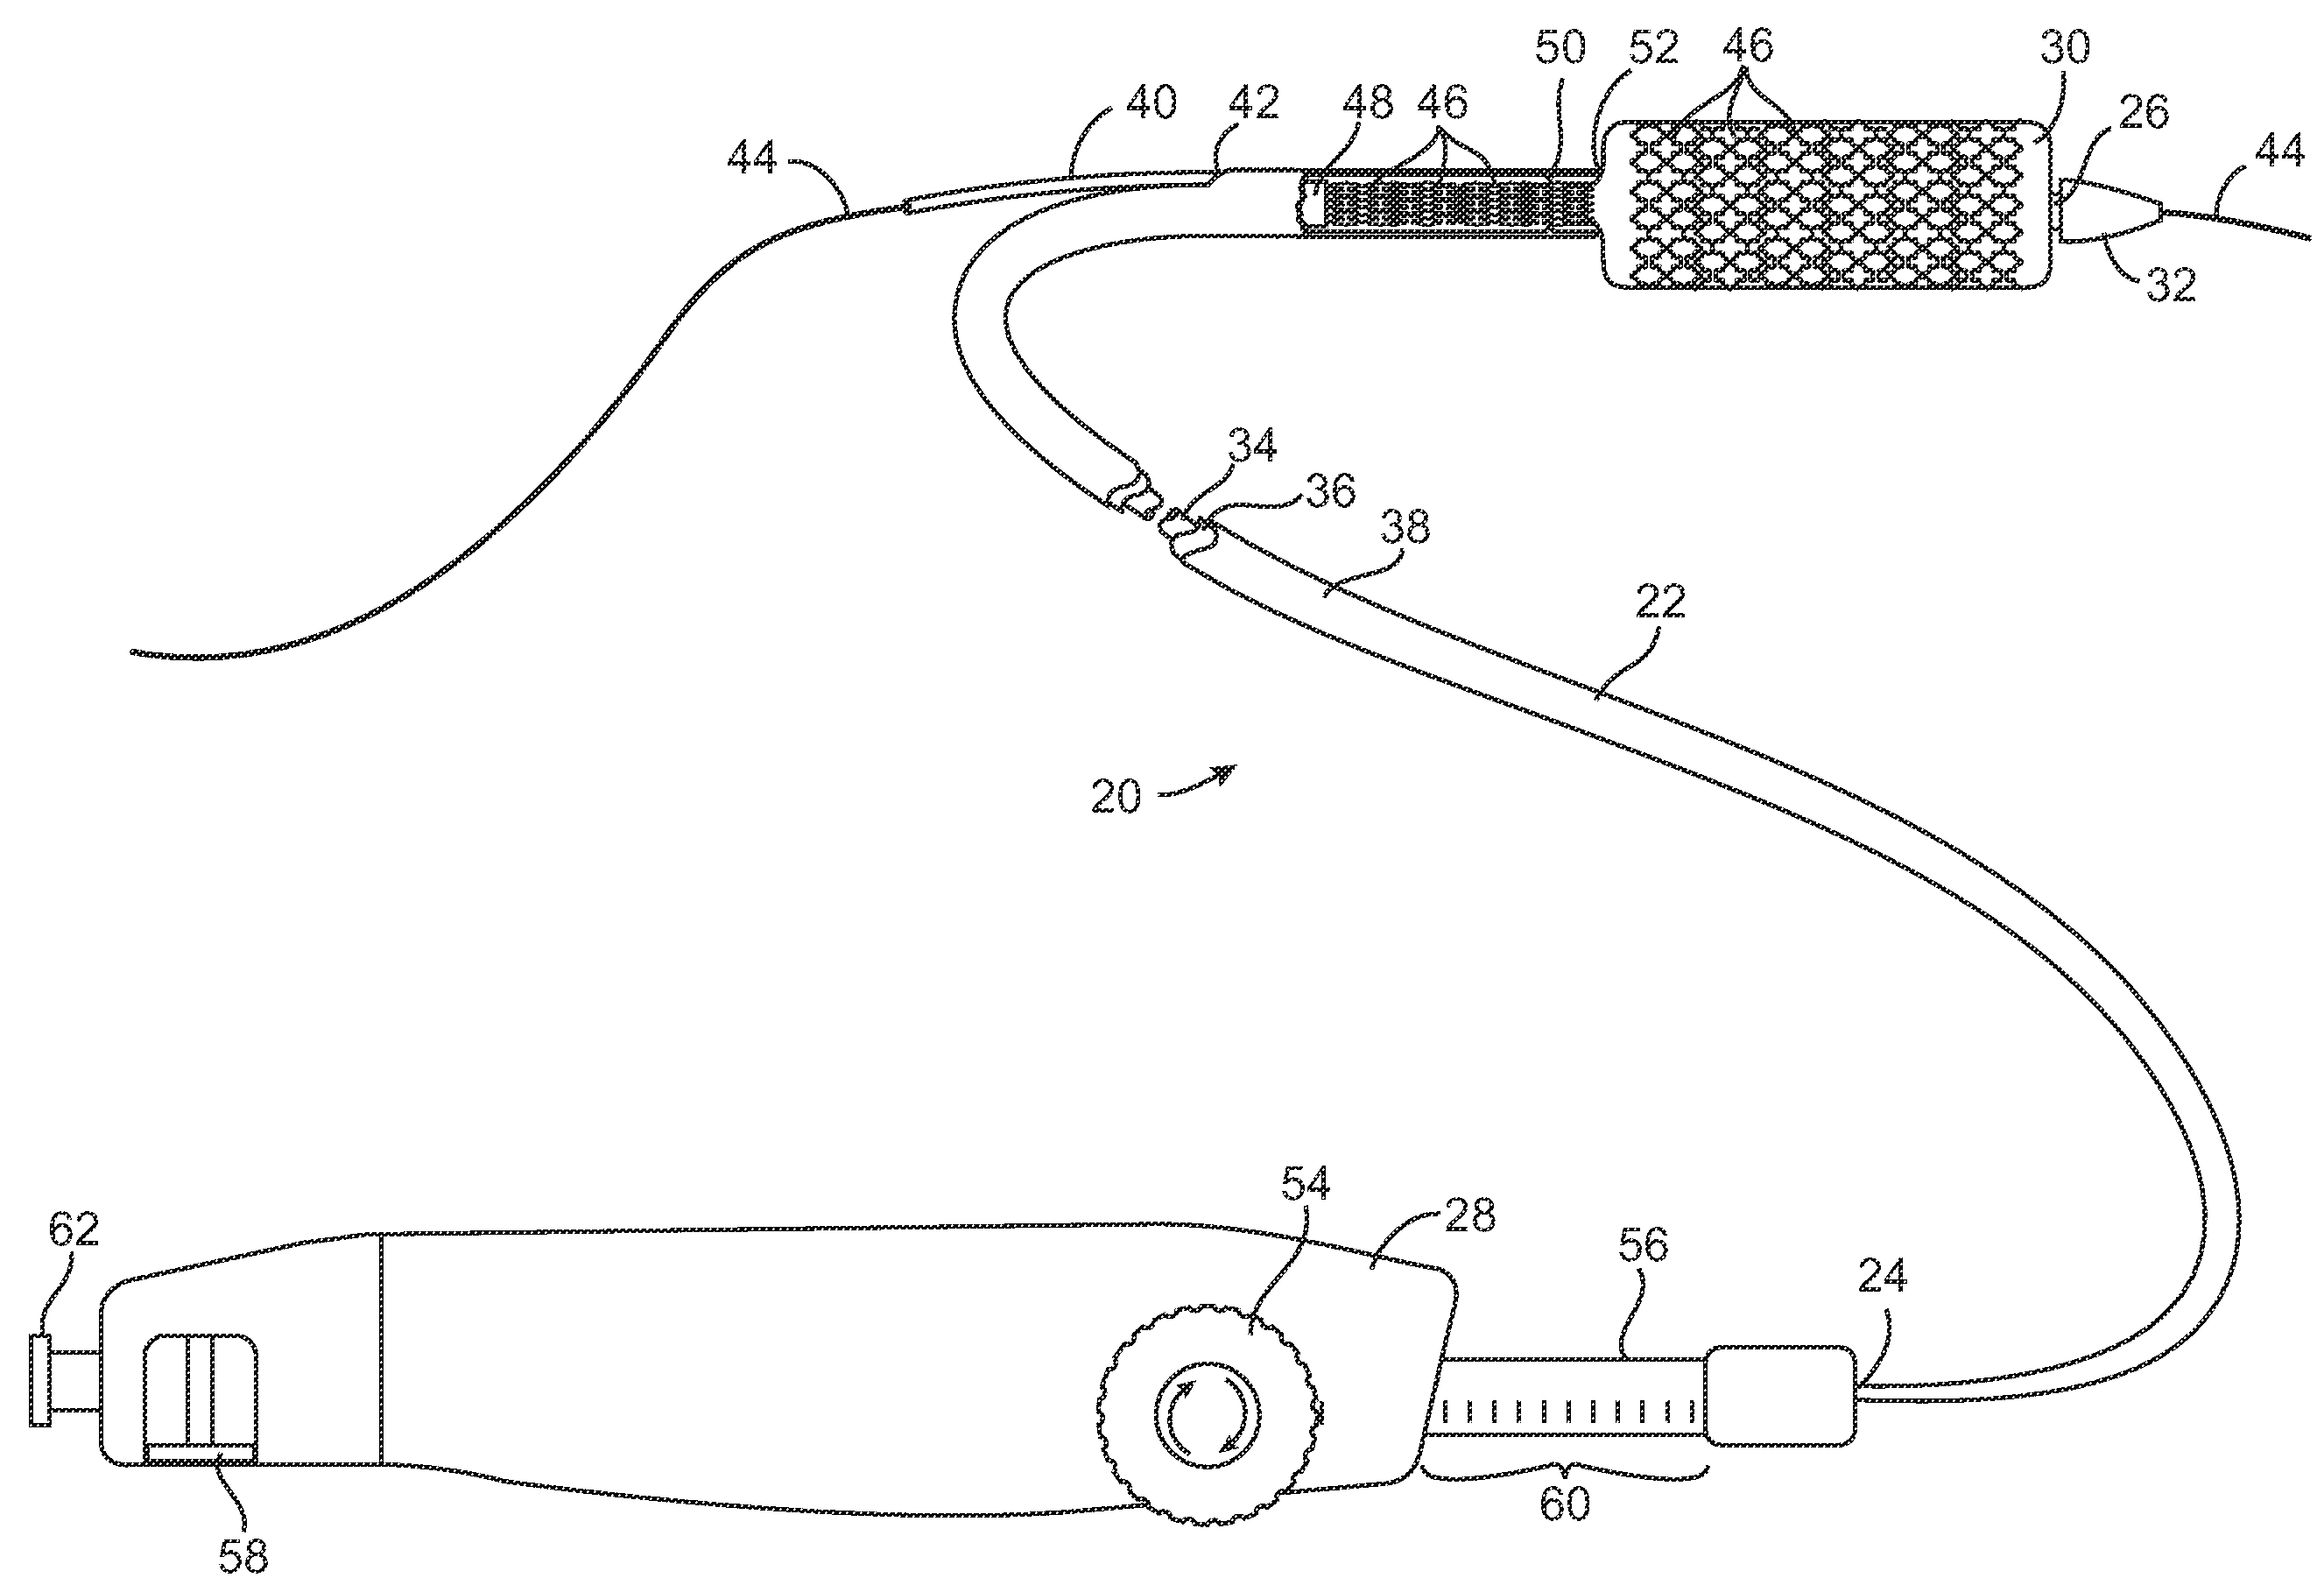 Devices and methods for controlling and indicating the length of an interventional element